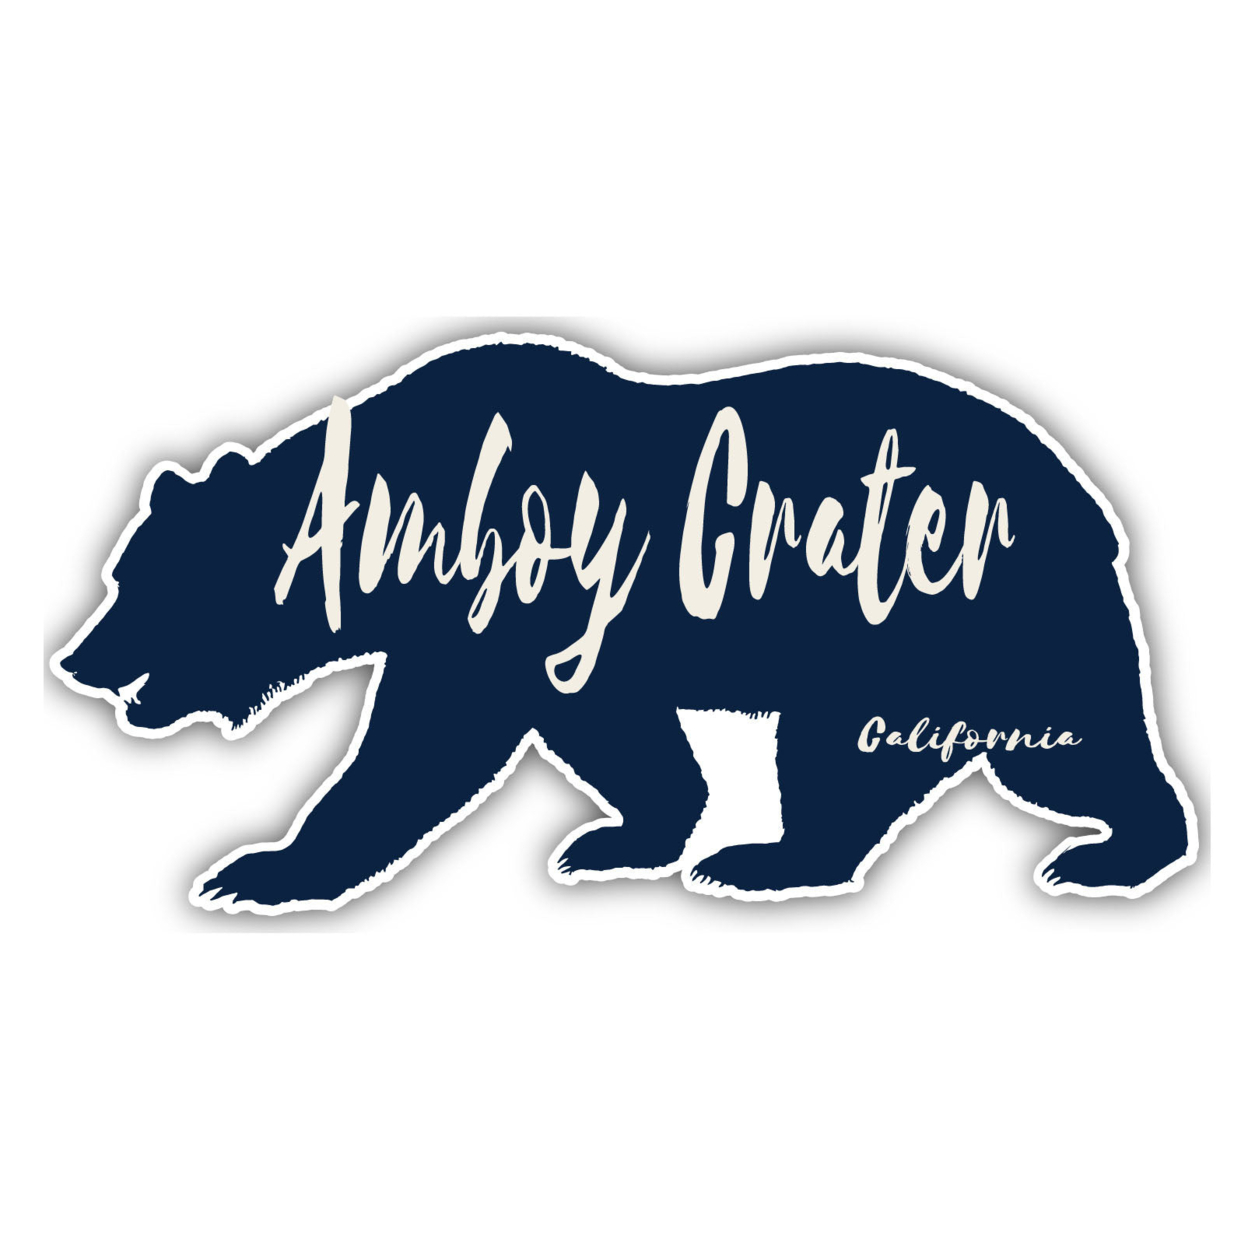 Amboy Crater California Souvenir Decorative Stickers (Choose Theme And Size) - 4-Pack, 2-Inch, Bear